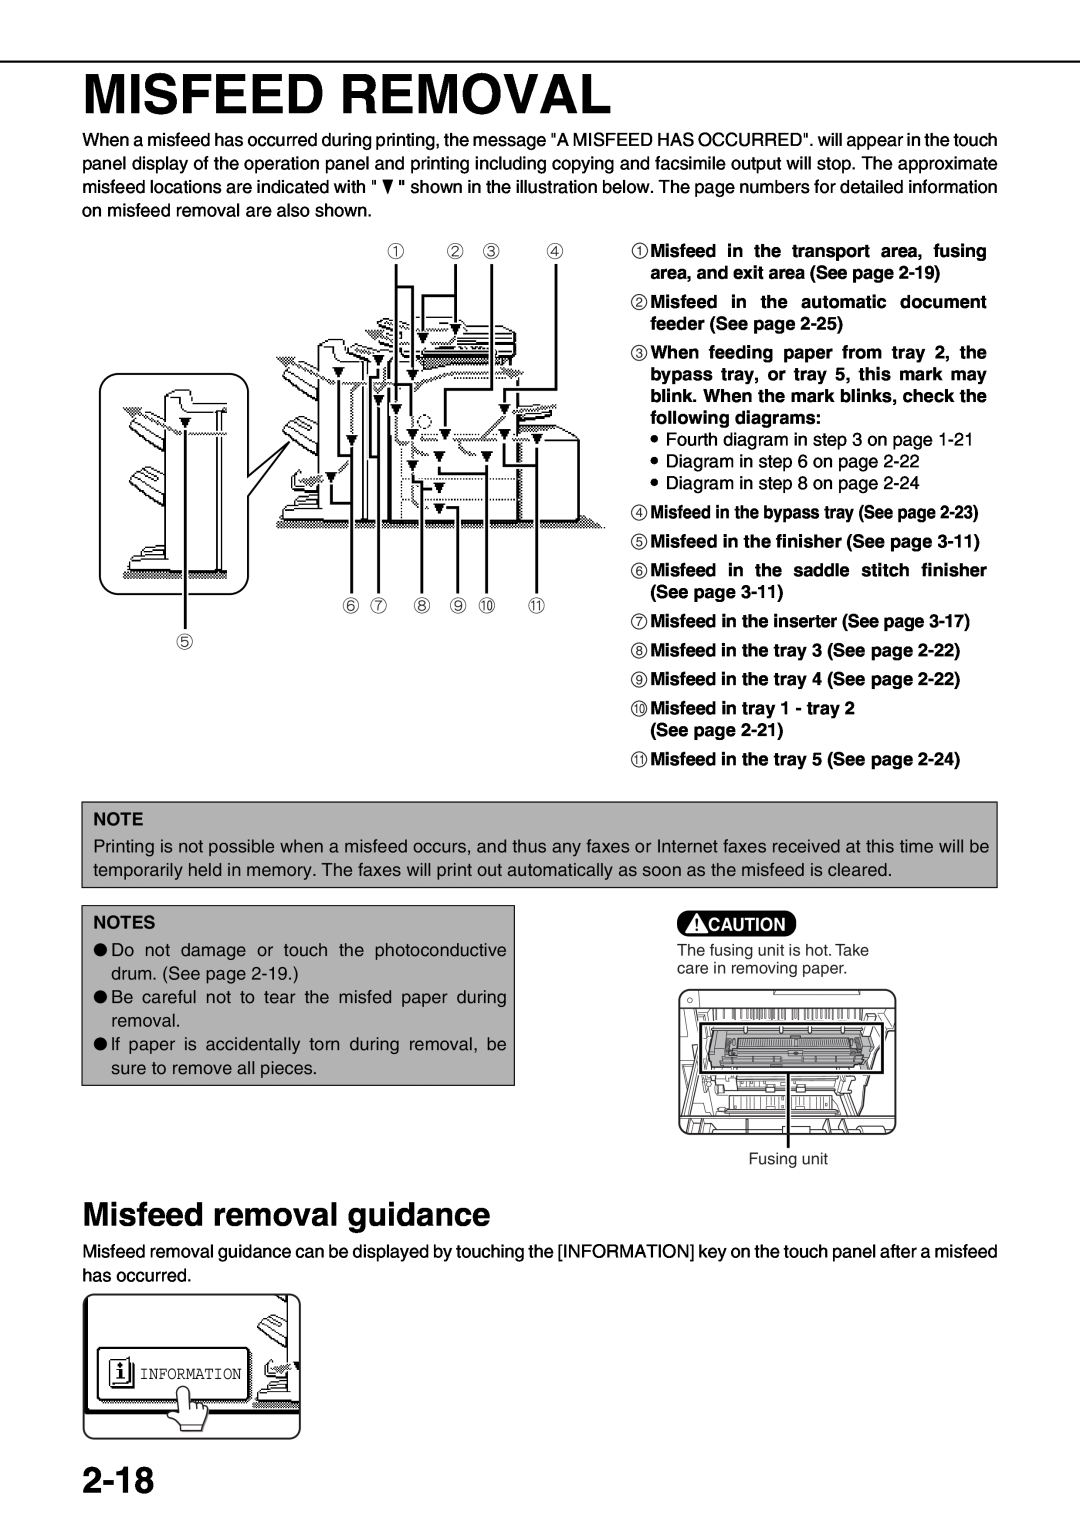 Sharp AR-M550U Misfeed Removal, 2-18, Misfeed removal guidance, Misfeed in the automatic document feeder See page 